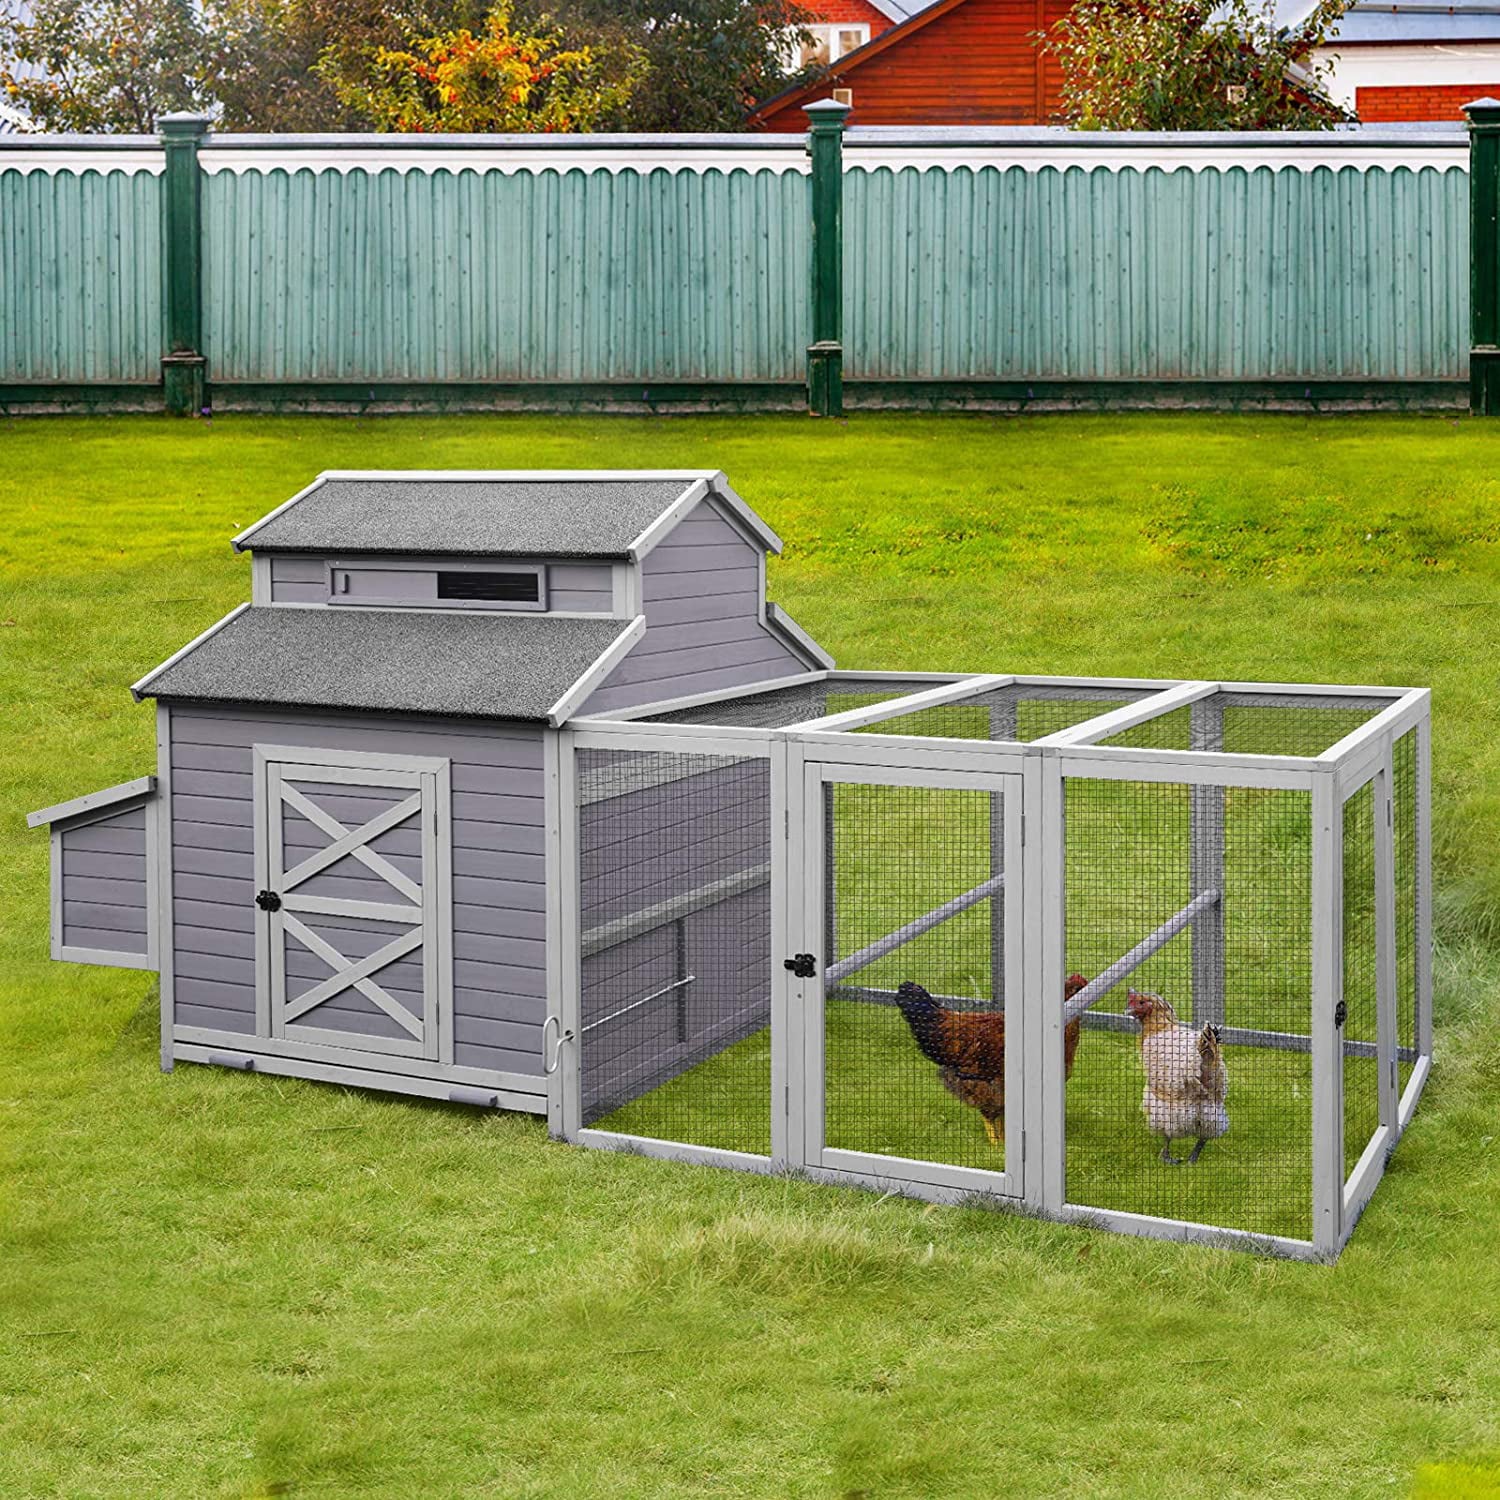 Morgete Extra Large Chicken Coop Wooden Hen House for 8-10 Chickens